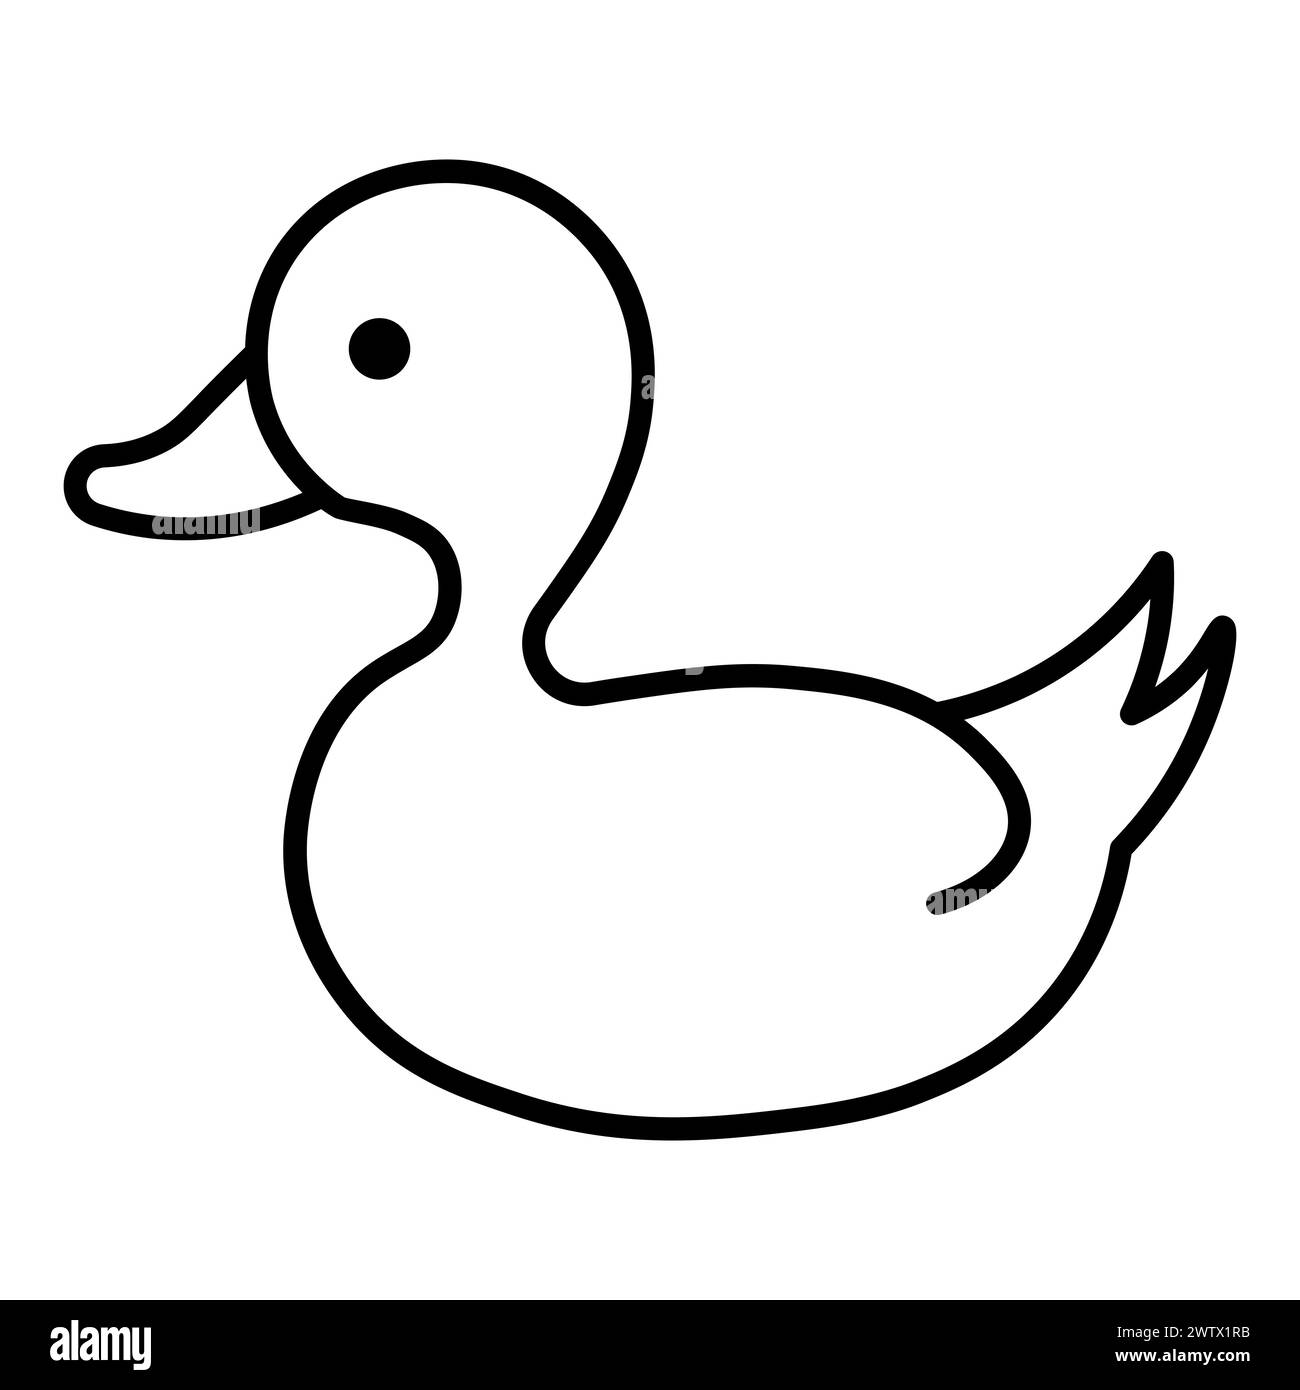 black vector duck icon on white background Stock Vector